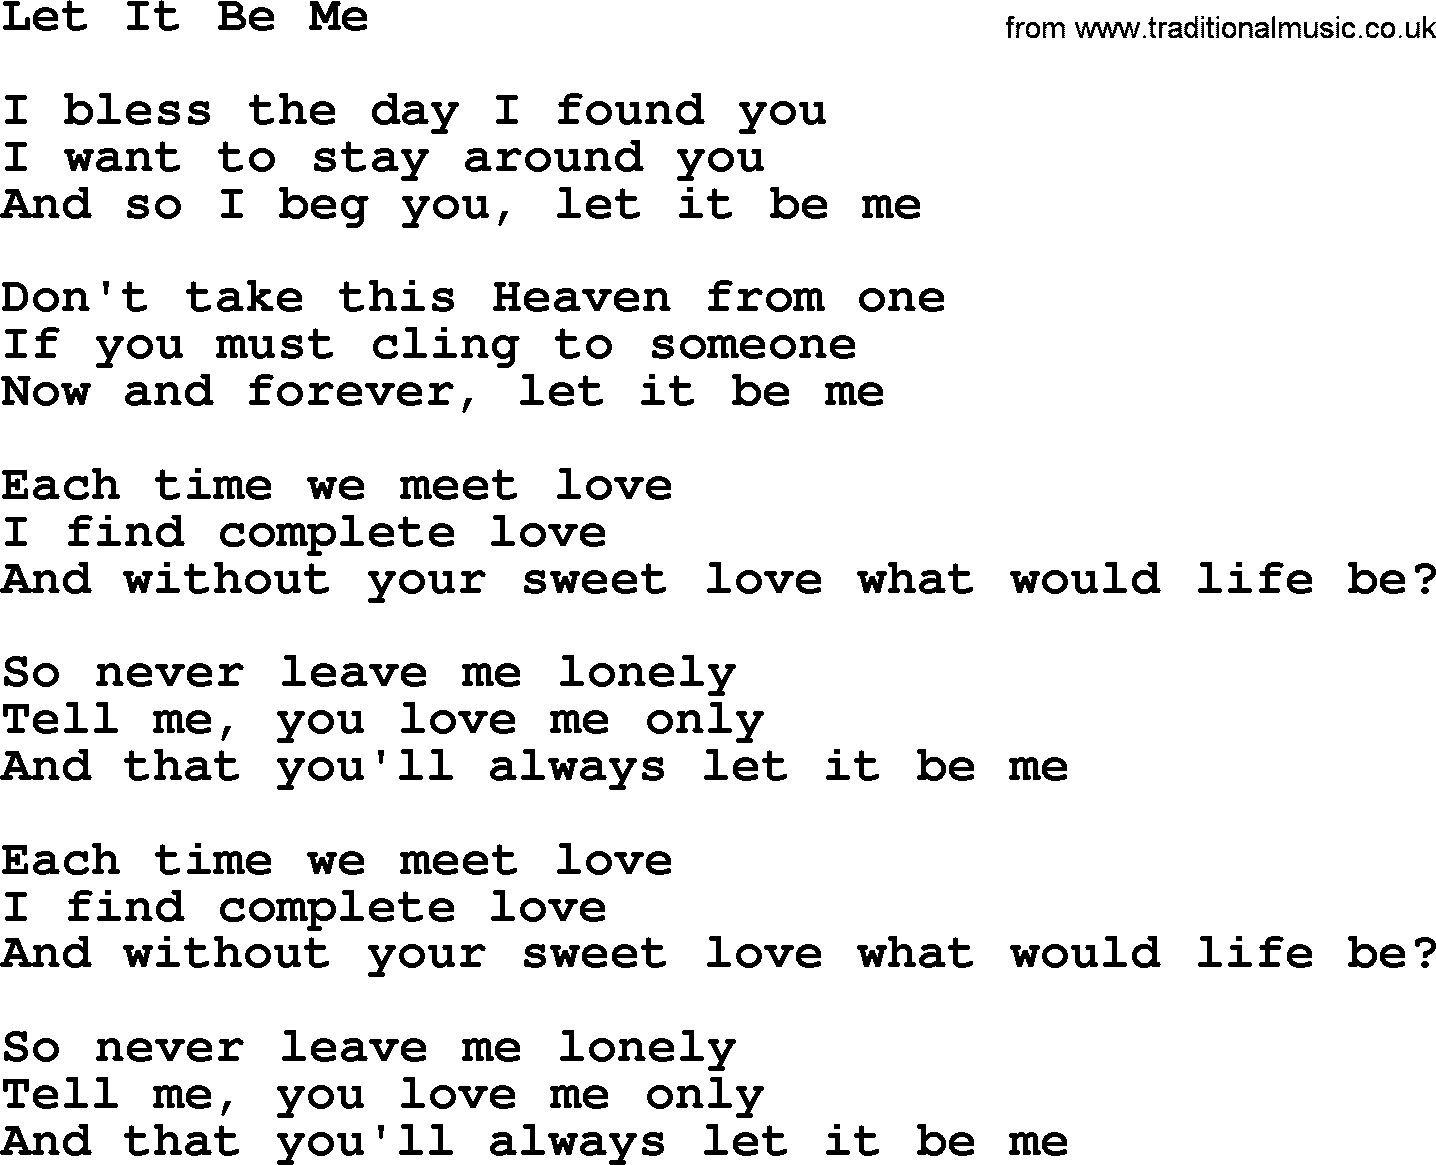 Willie Nelson song: Let It Be Me lyrics